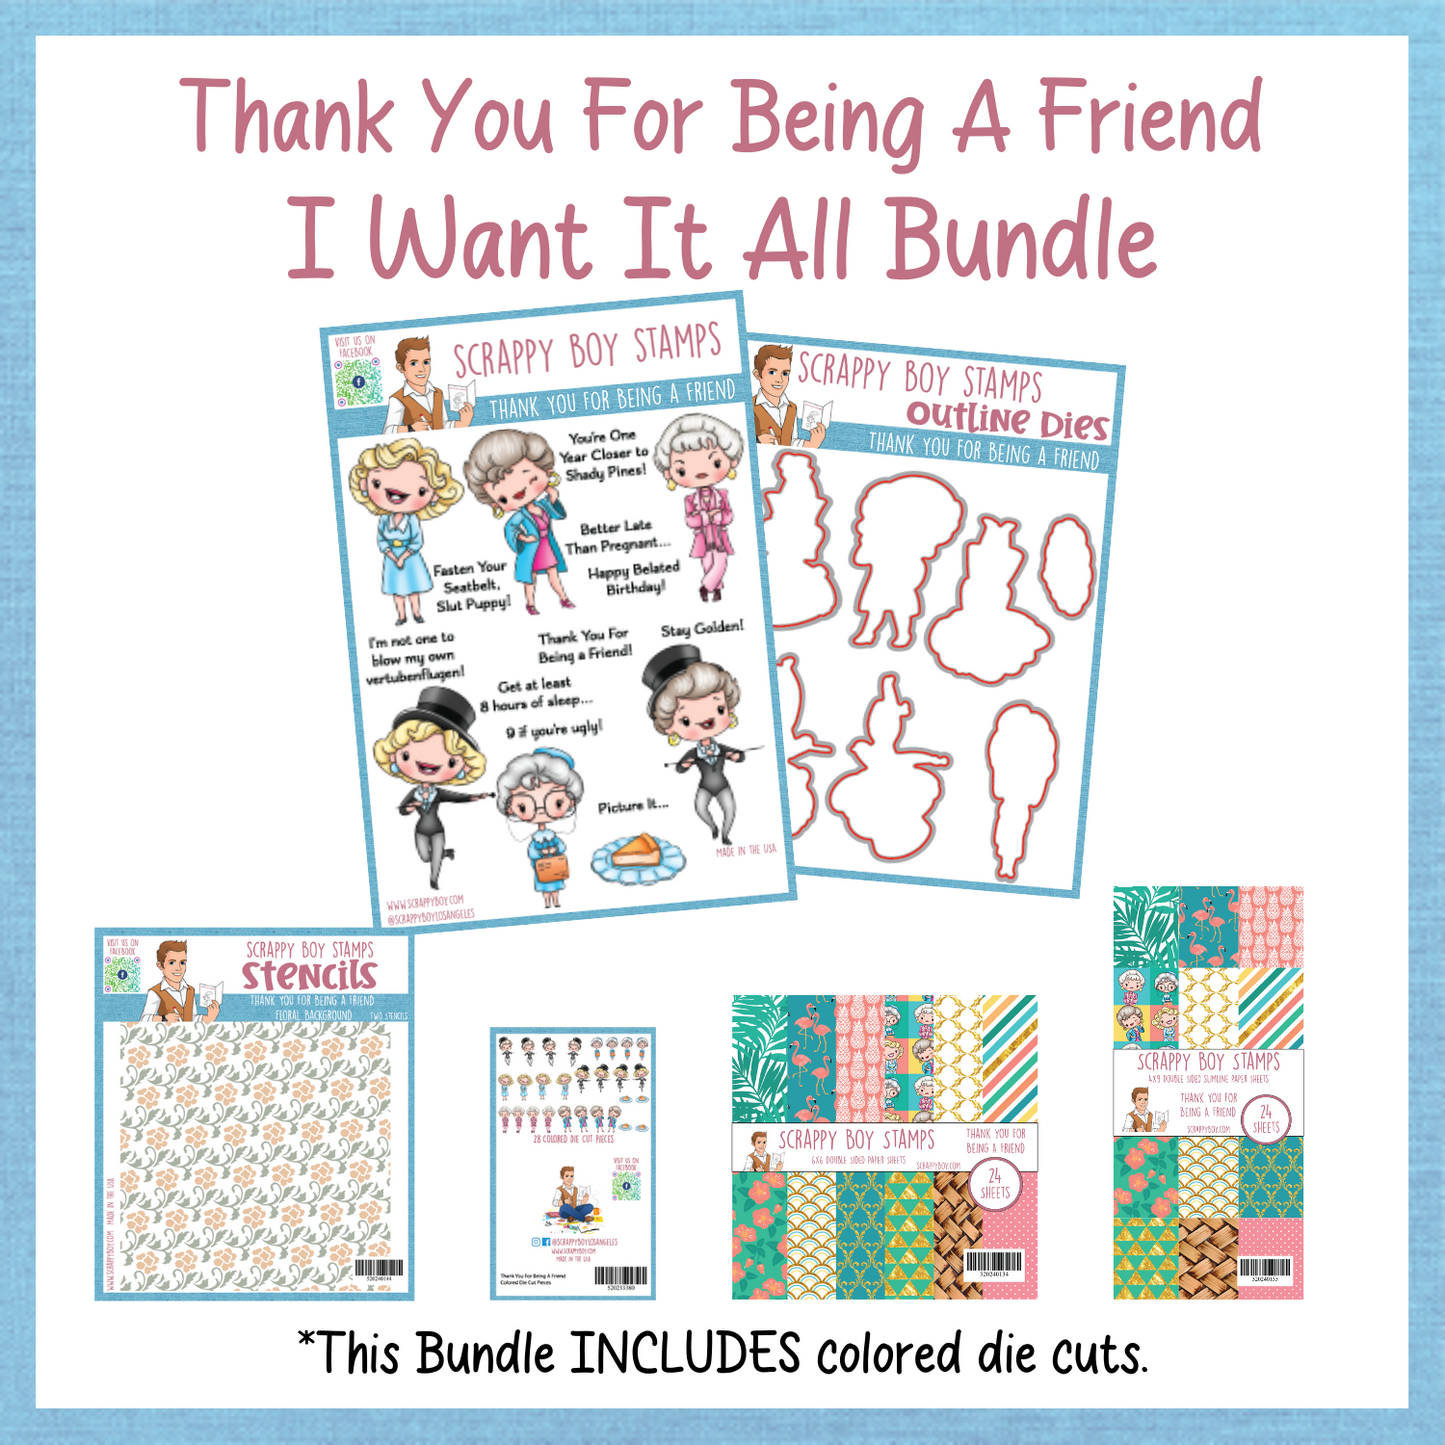 I Want It All Bundle - Thank You For Being A Friend Release Scrappy Boy Stamps